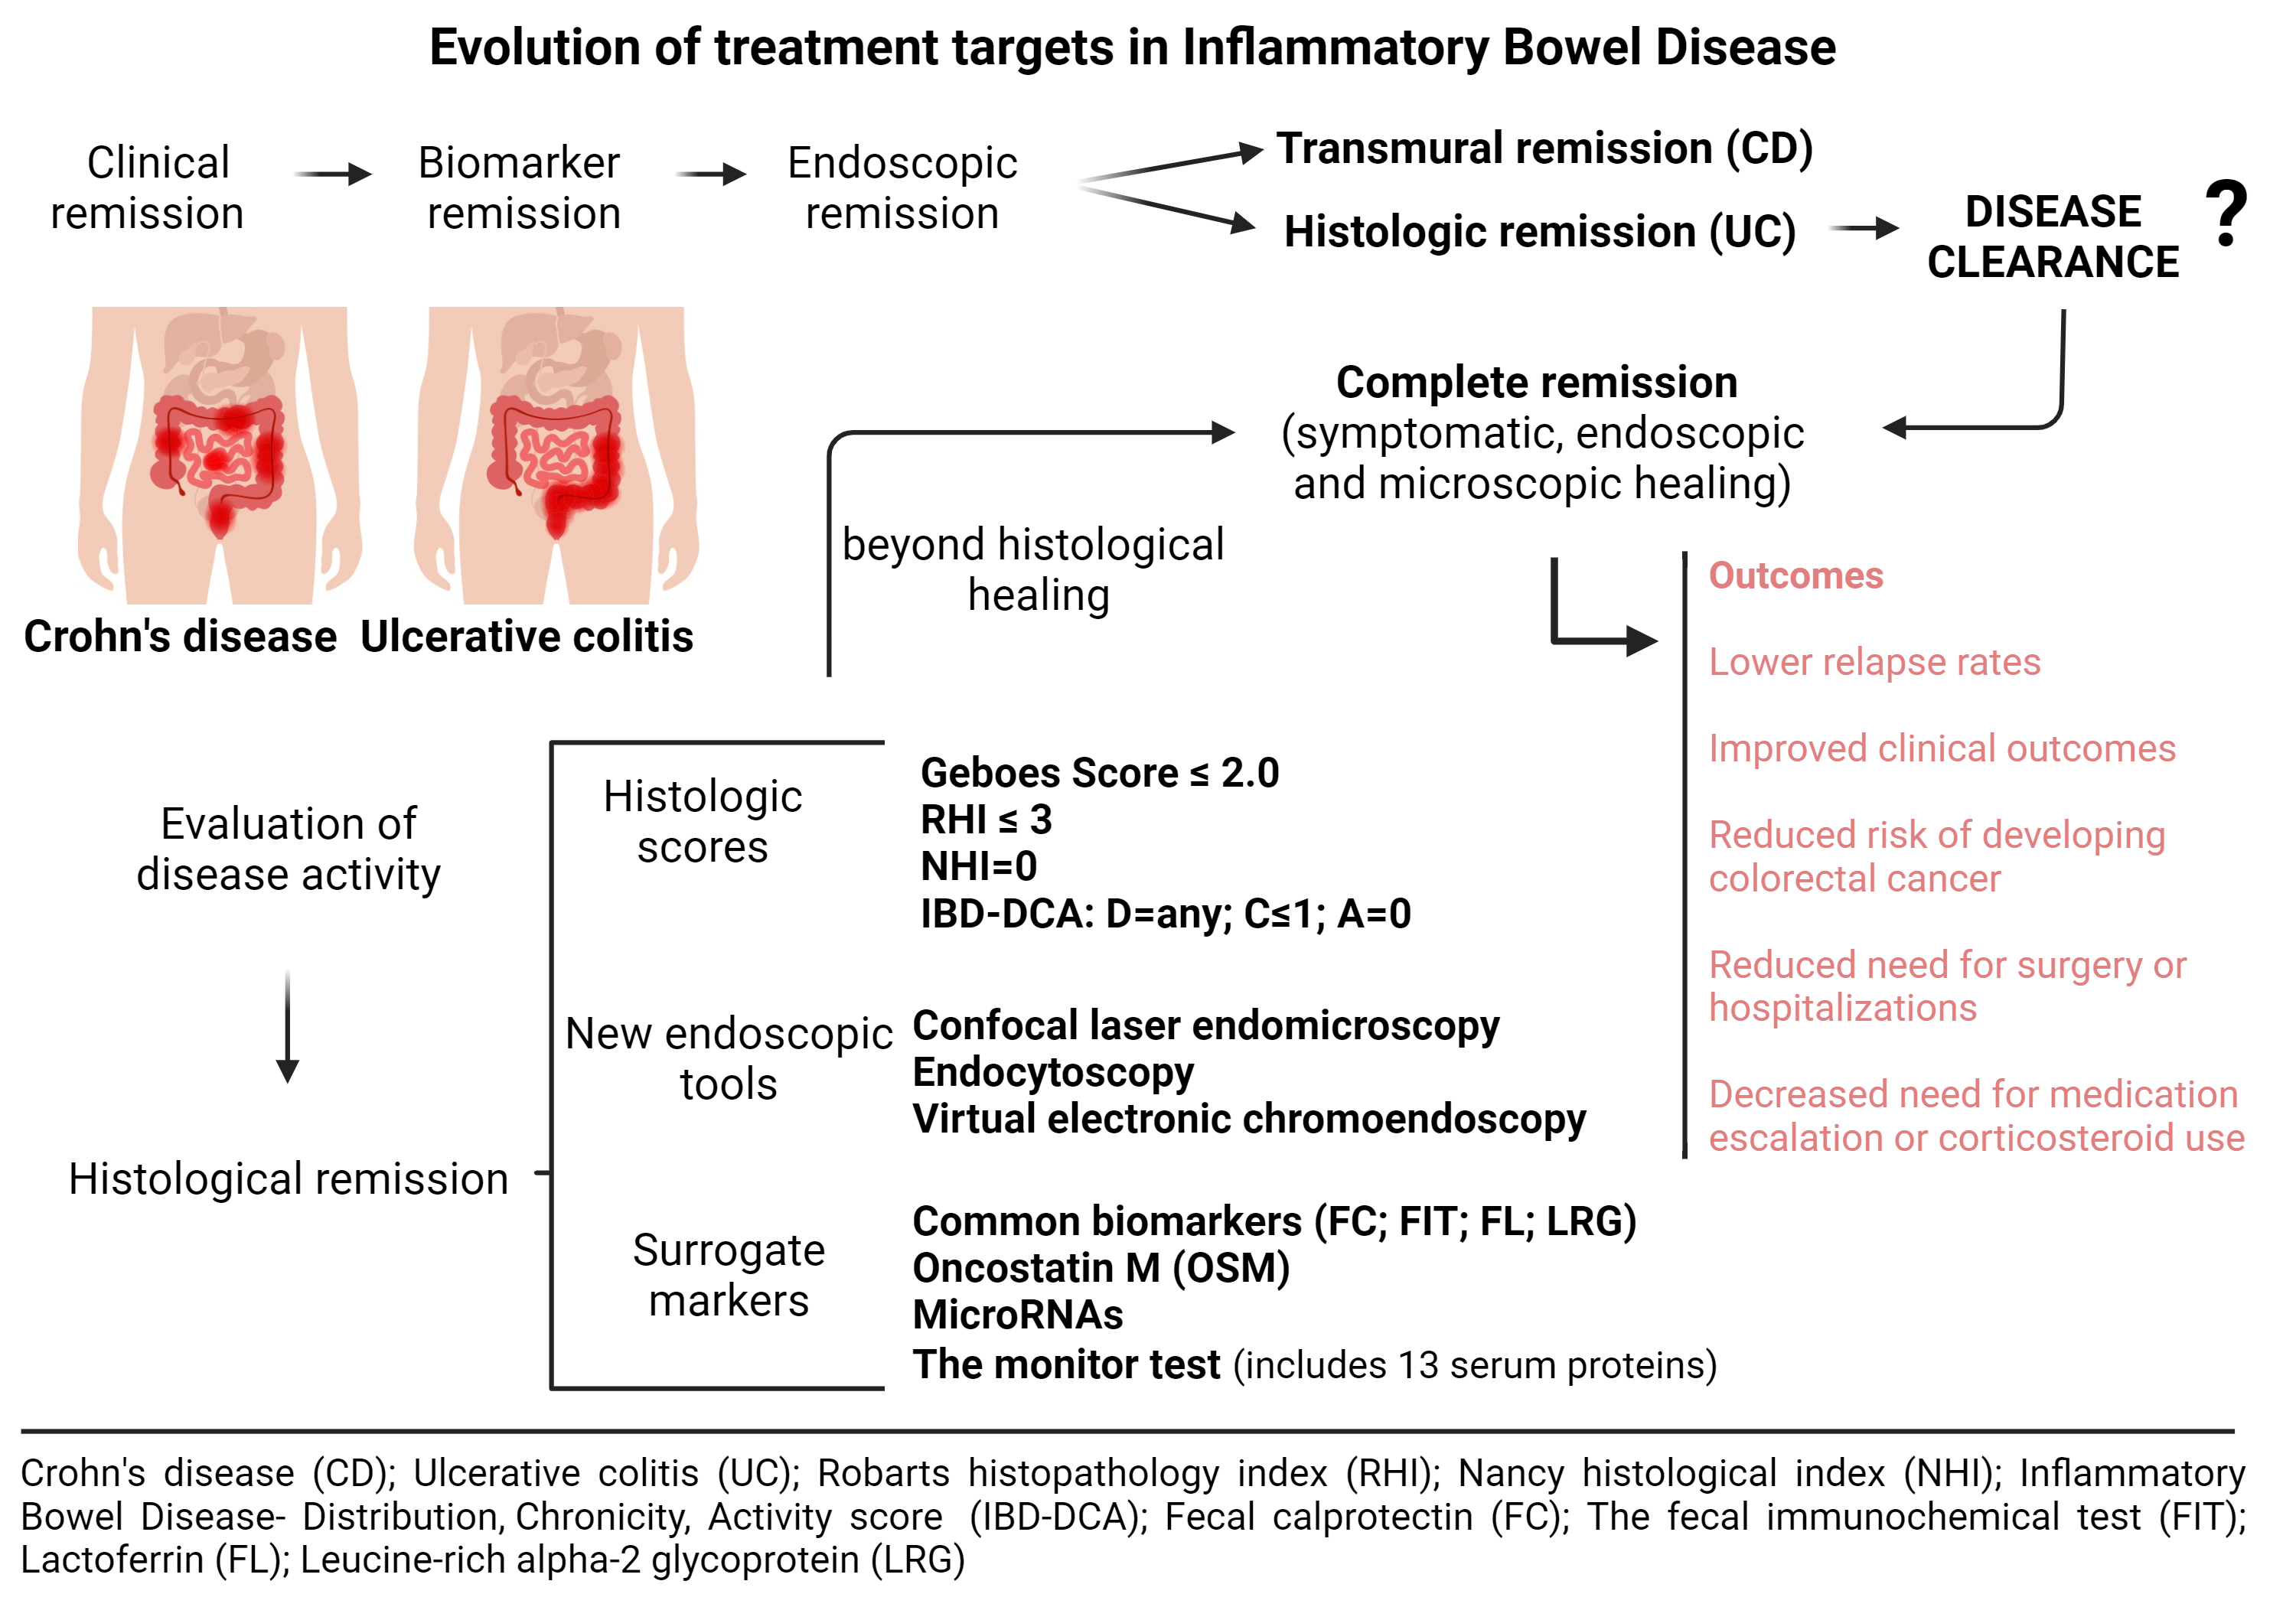 Clinical Challenge: Long-term Concerns in Ulcerative Colitis